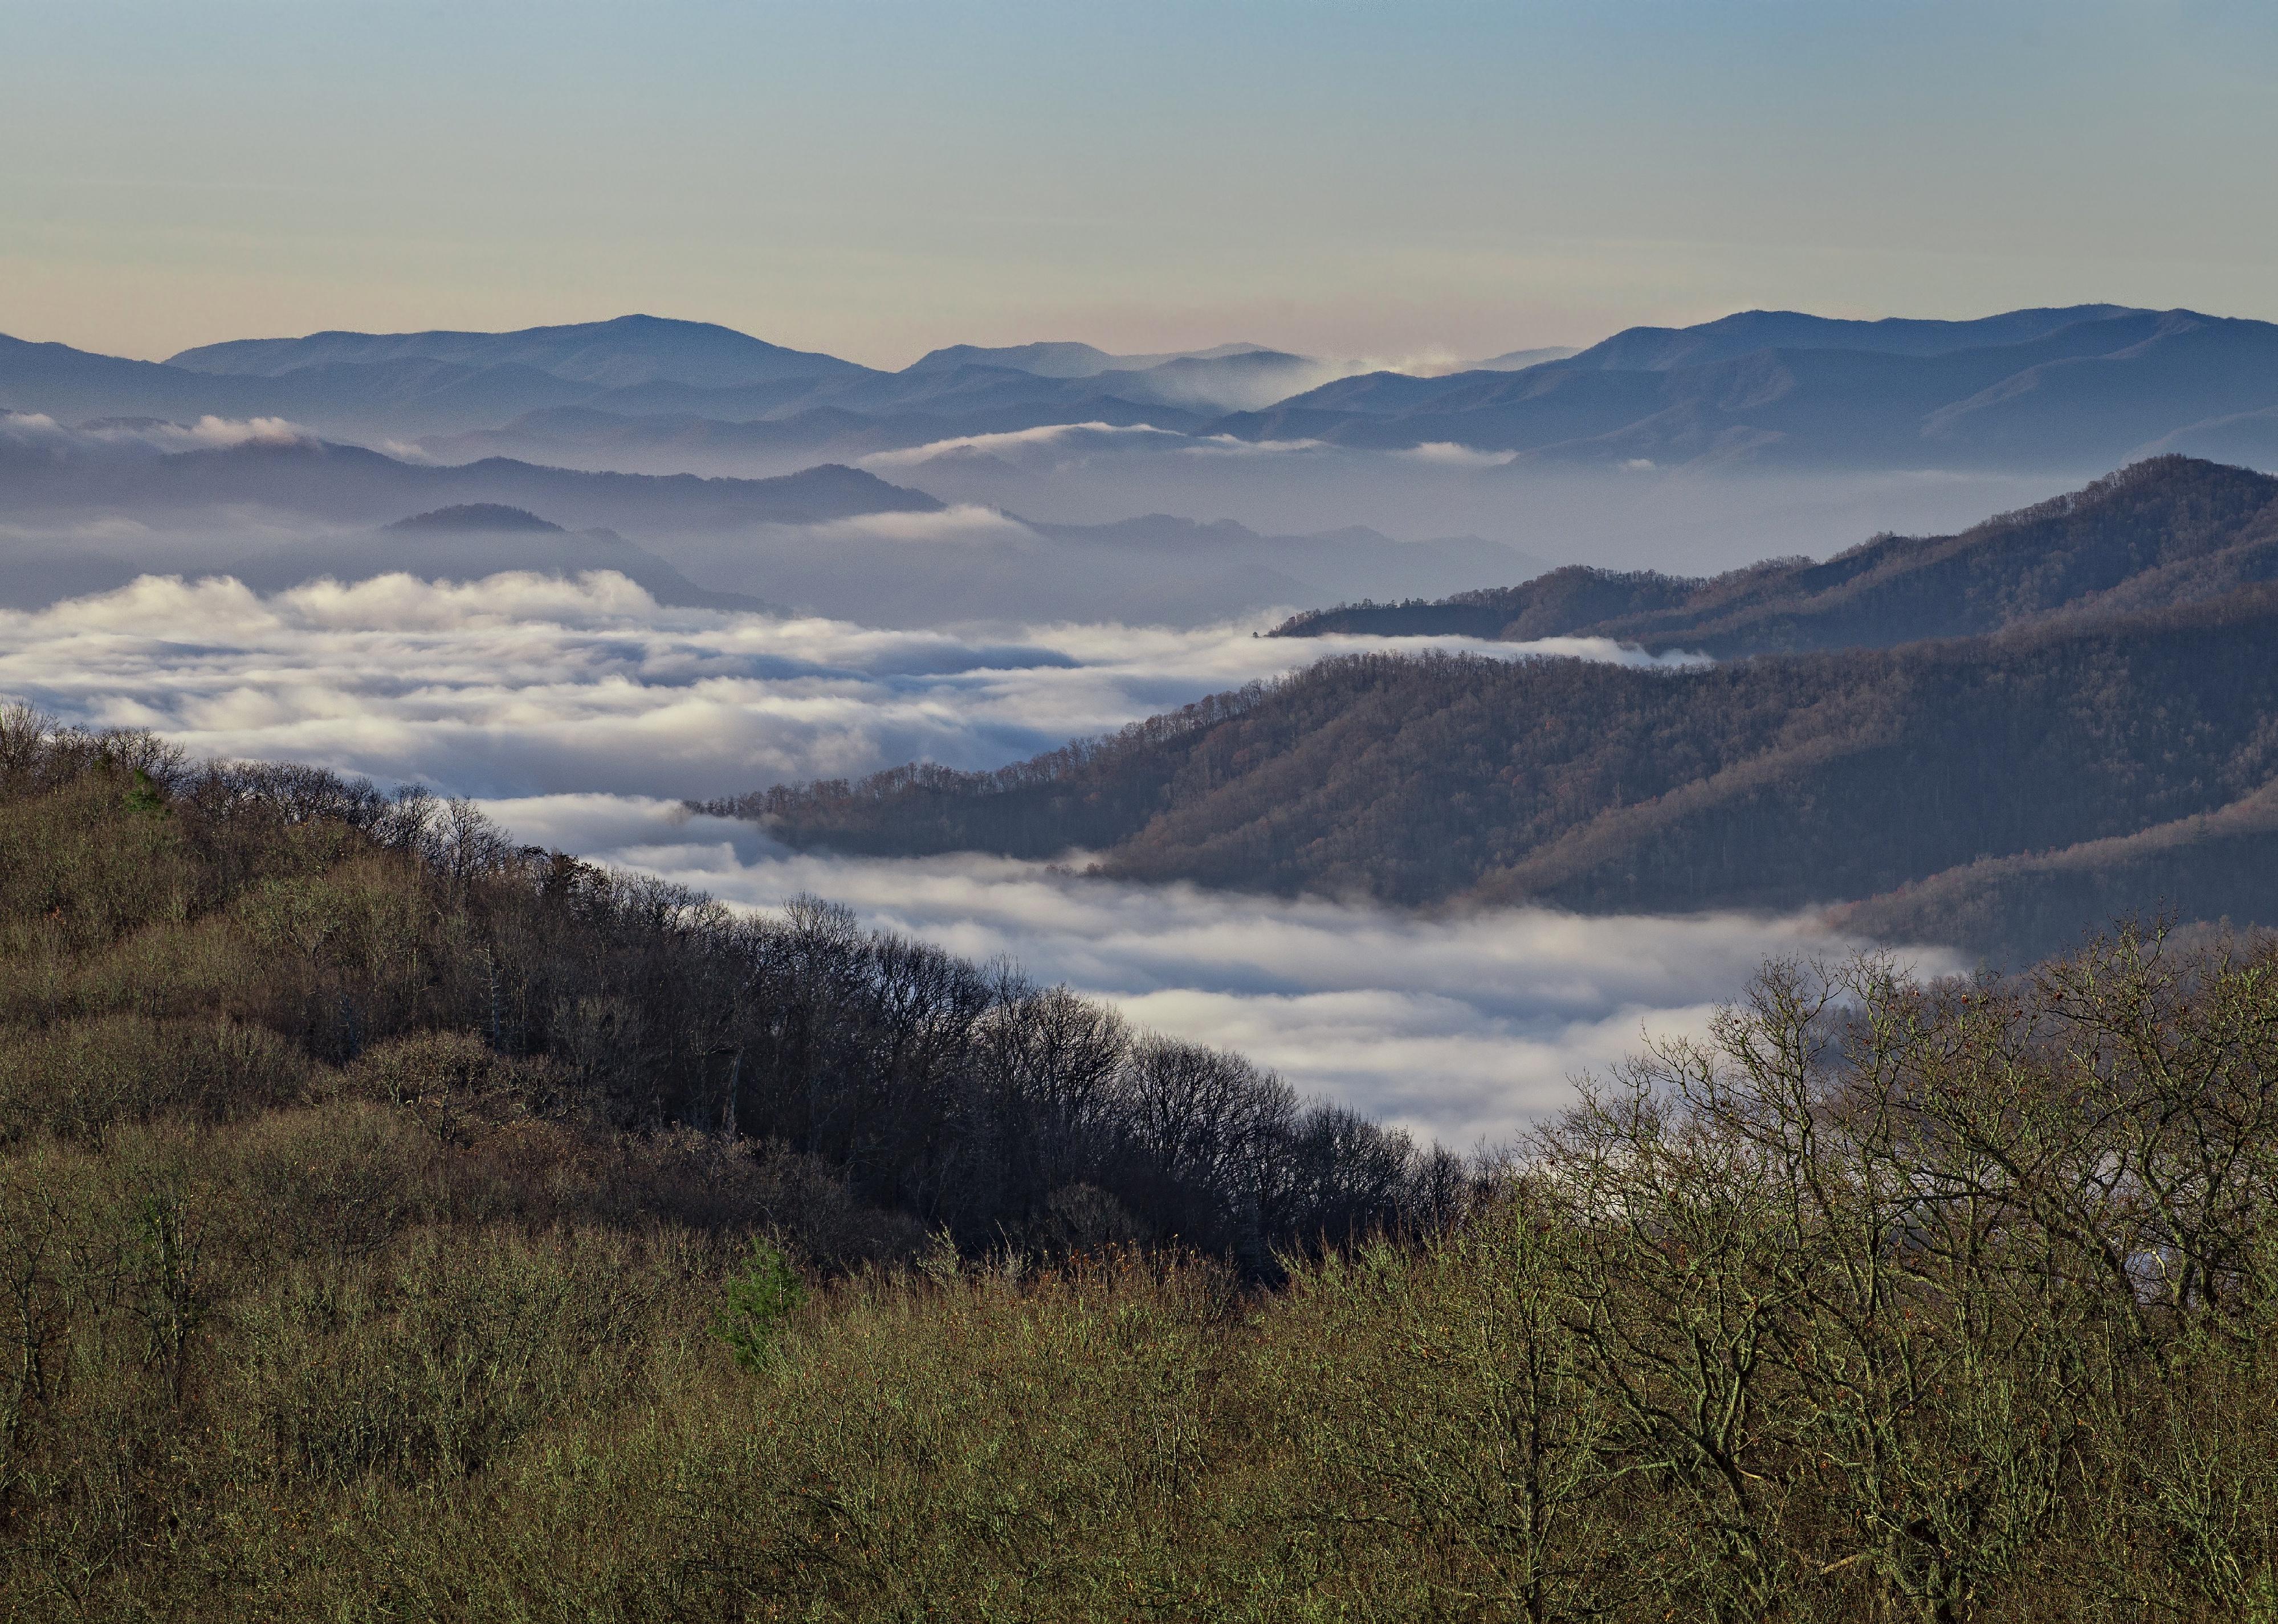 Early morning in the Great Smoky Mountains National Park.